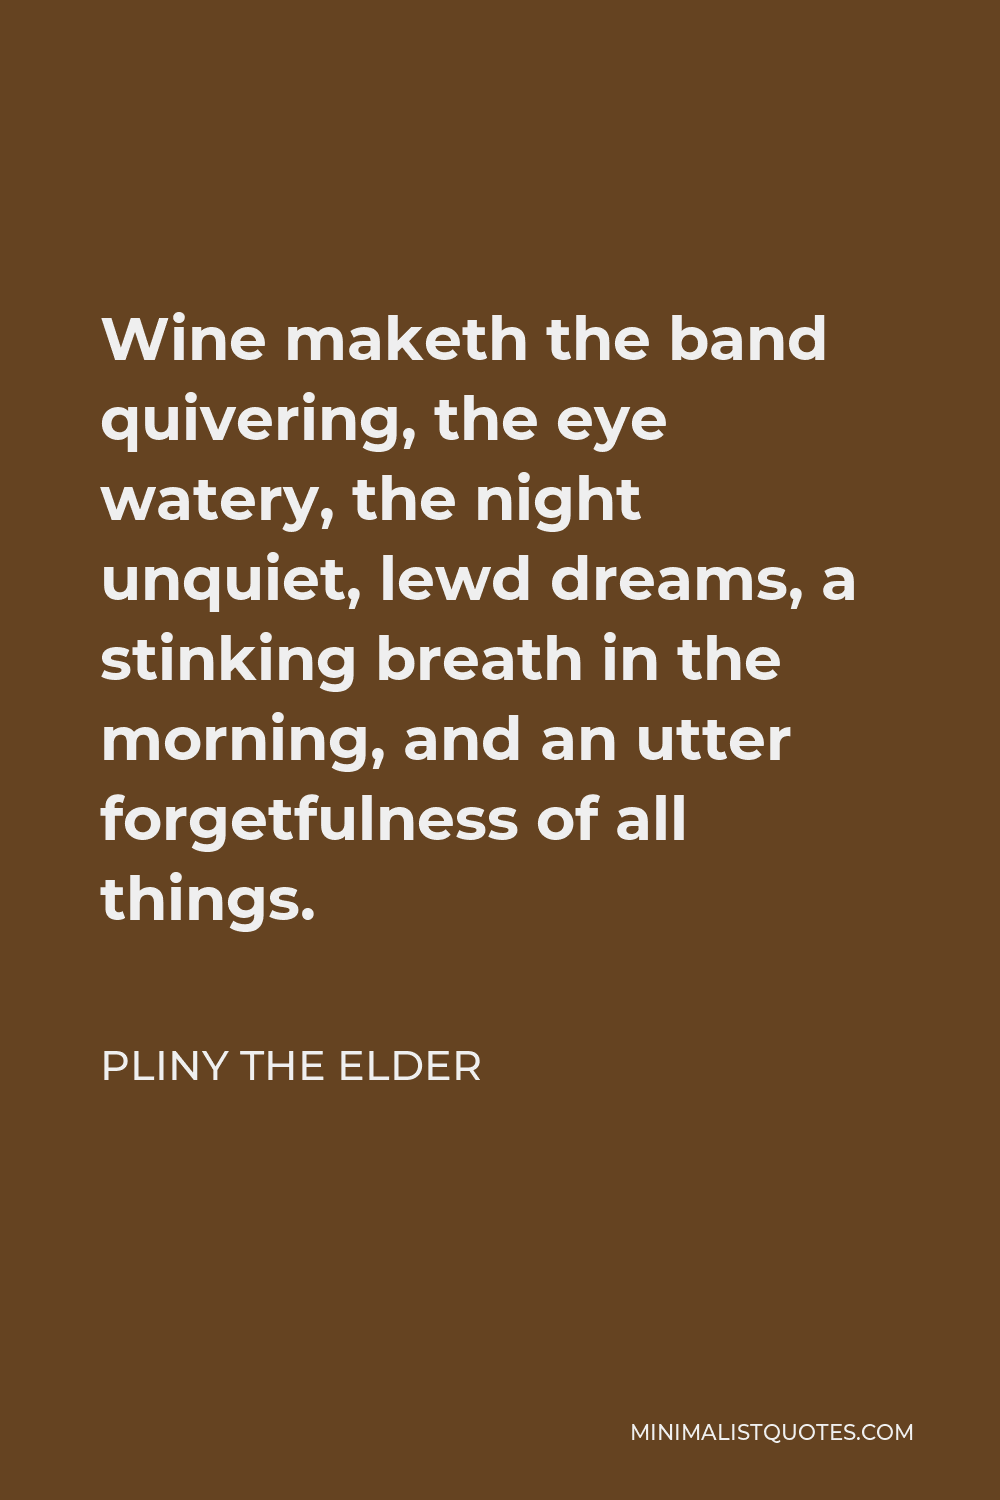 Pliny the Elder Quote - Wine maketh the band quivering, the eye watery, the night unquiet, lewd dreams, a stinking breath in the morning, and an utter forgetfulness of all things.